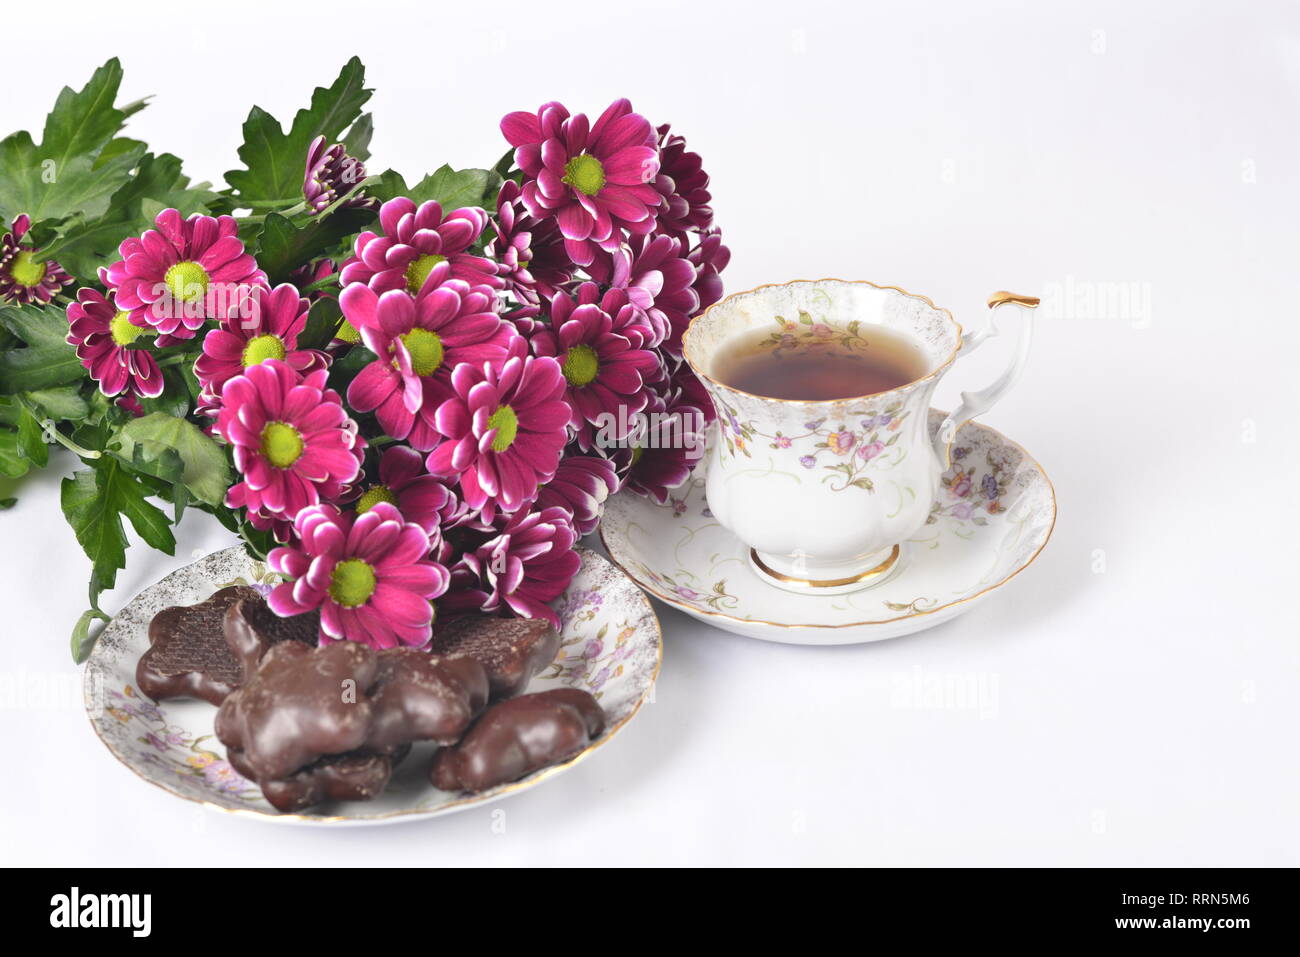 Table setting, flower bouquet, tea and cookies Stock Photo